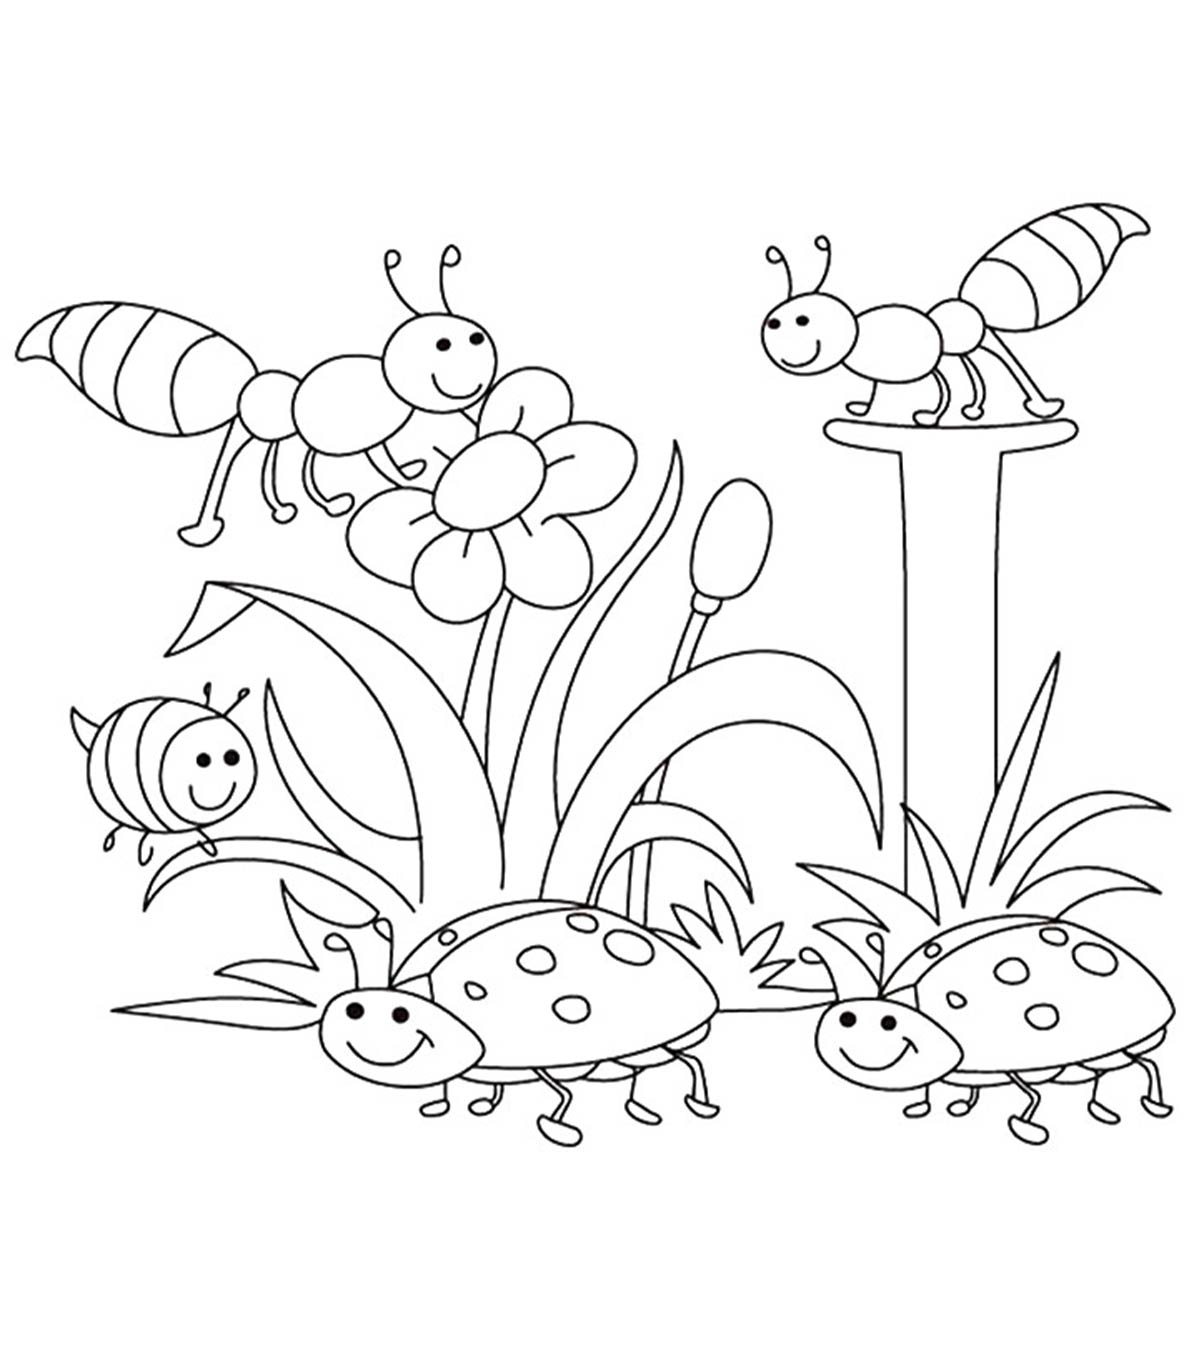 Spring Coloring Pages For Toddlers Top 35 Free Printable Spring Coloring Pages Online